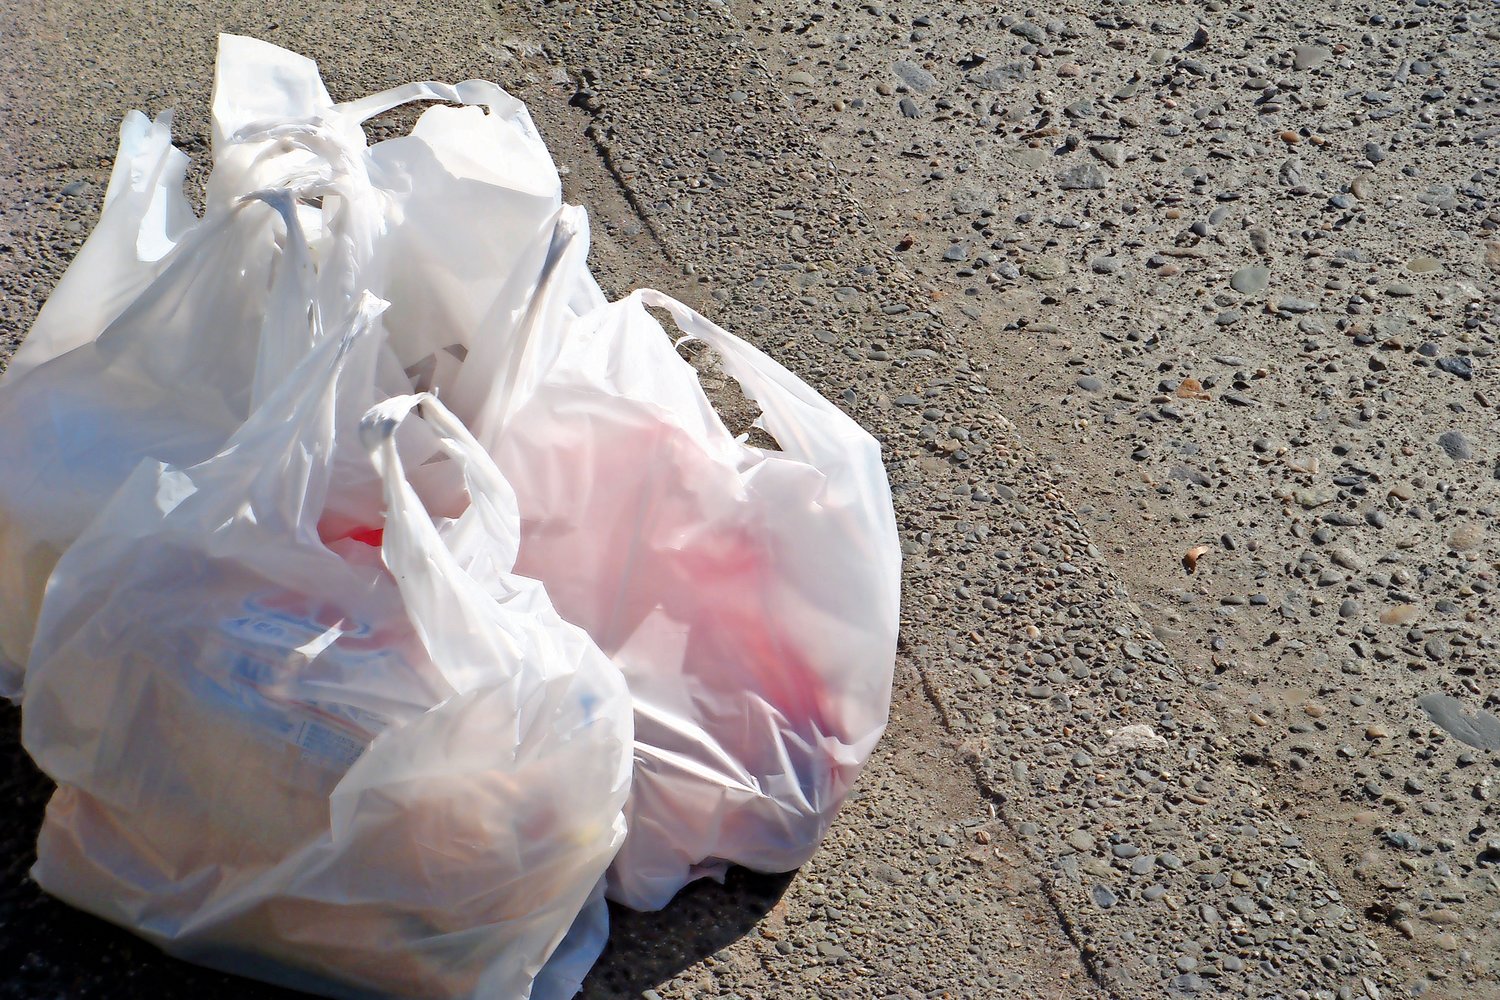 As part of the state budget passed over the weekend, plastic bags will be banned in New York retail stores.